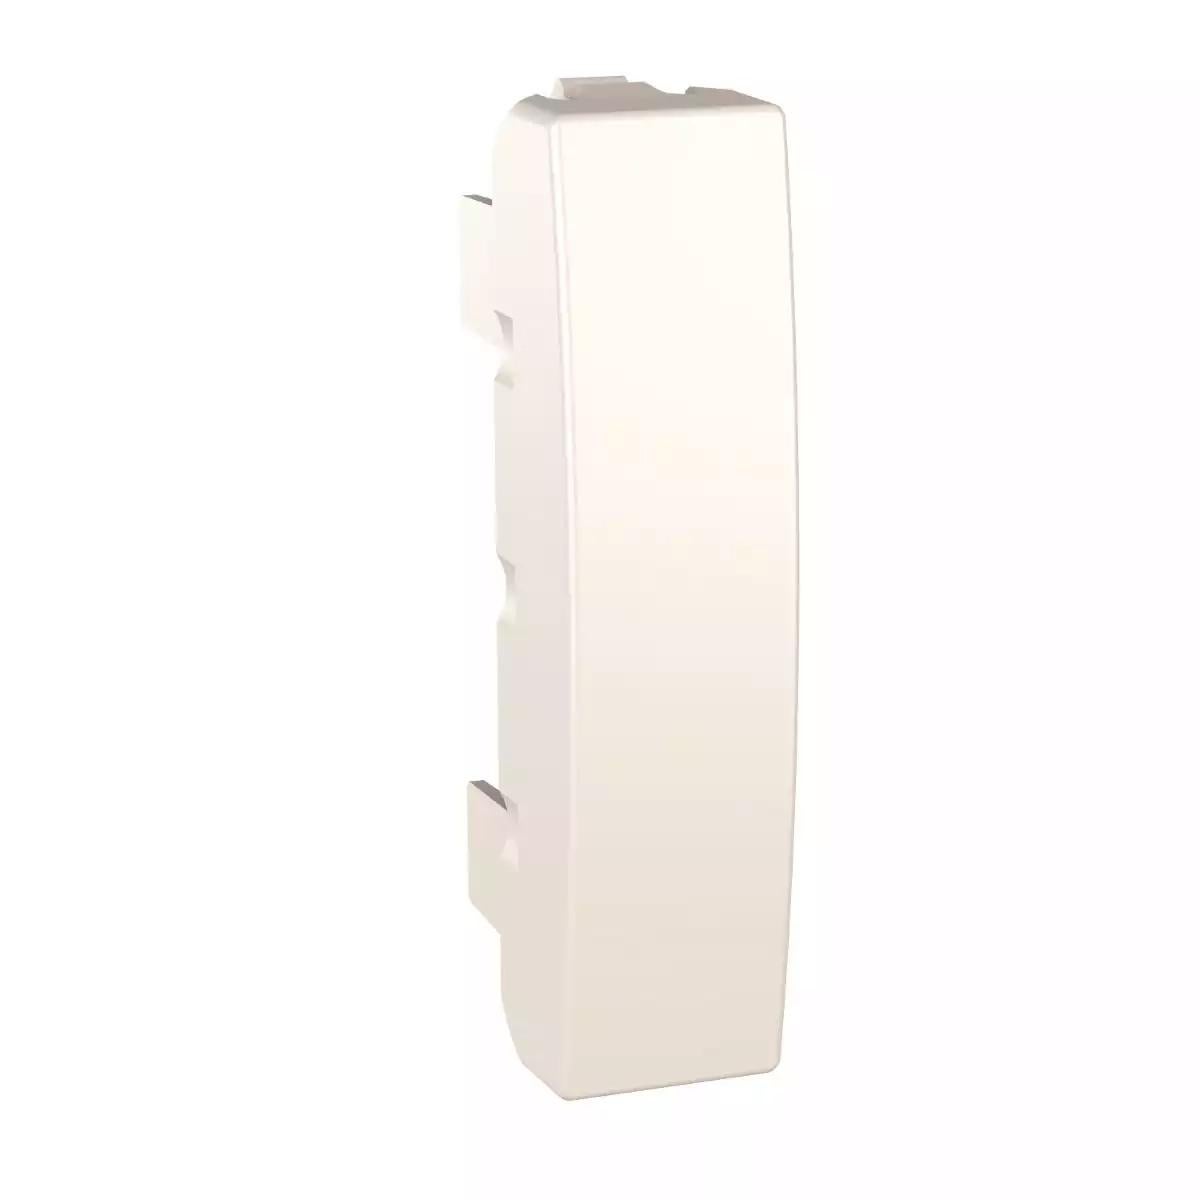 Unica - blind cover plate for - 0.5 m - ivory